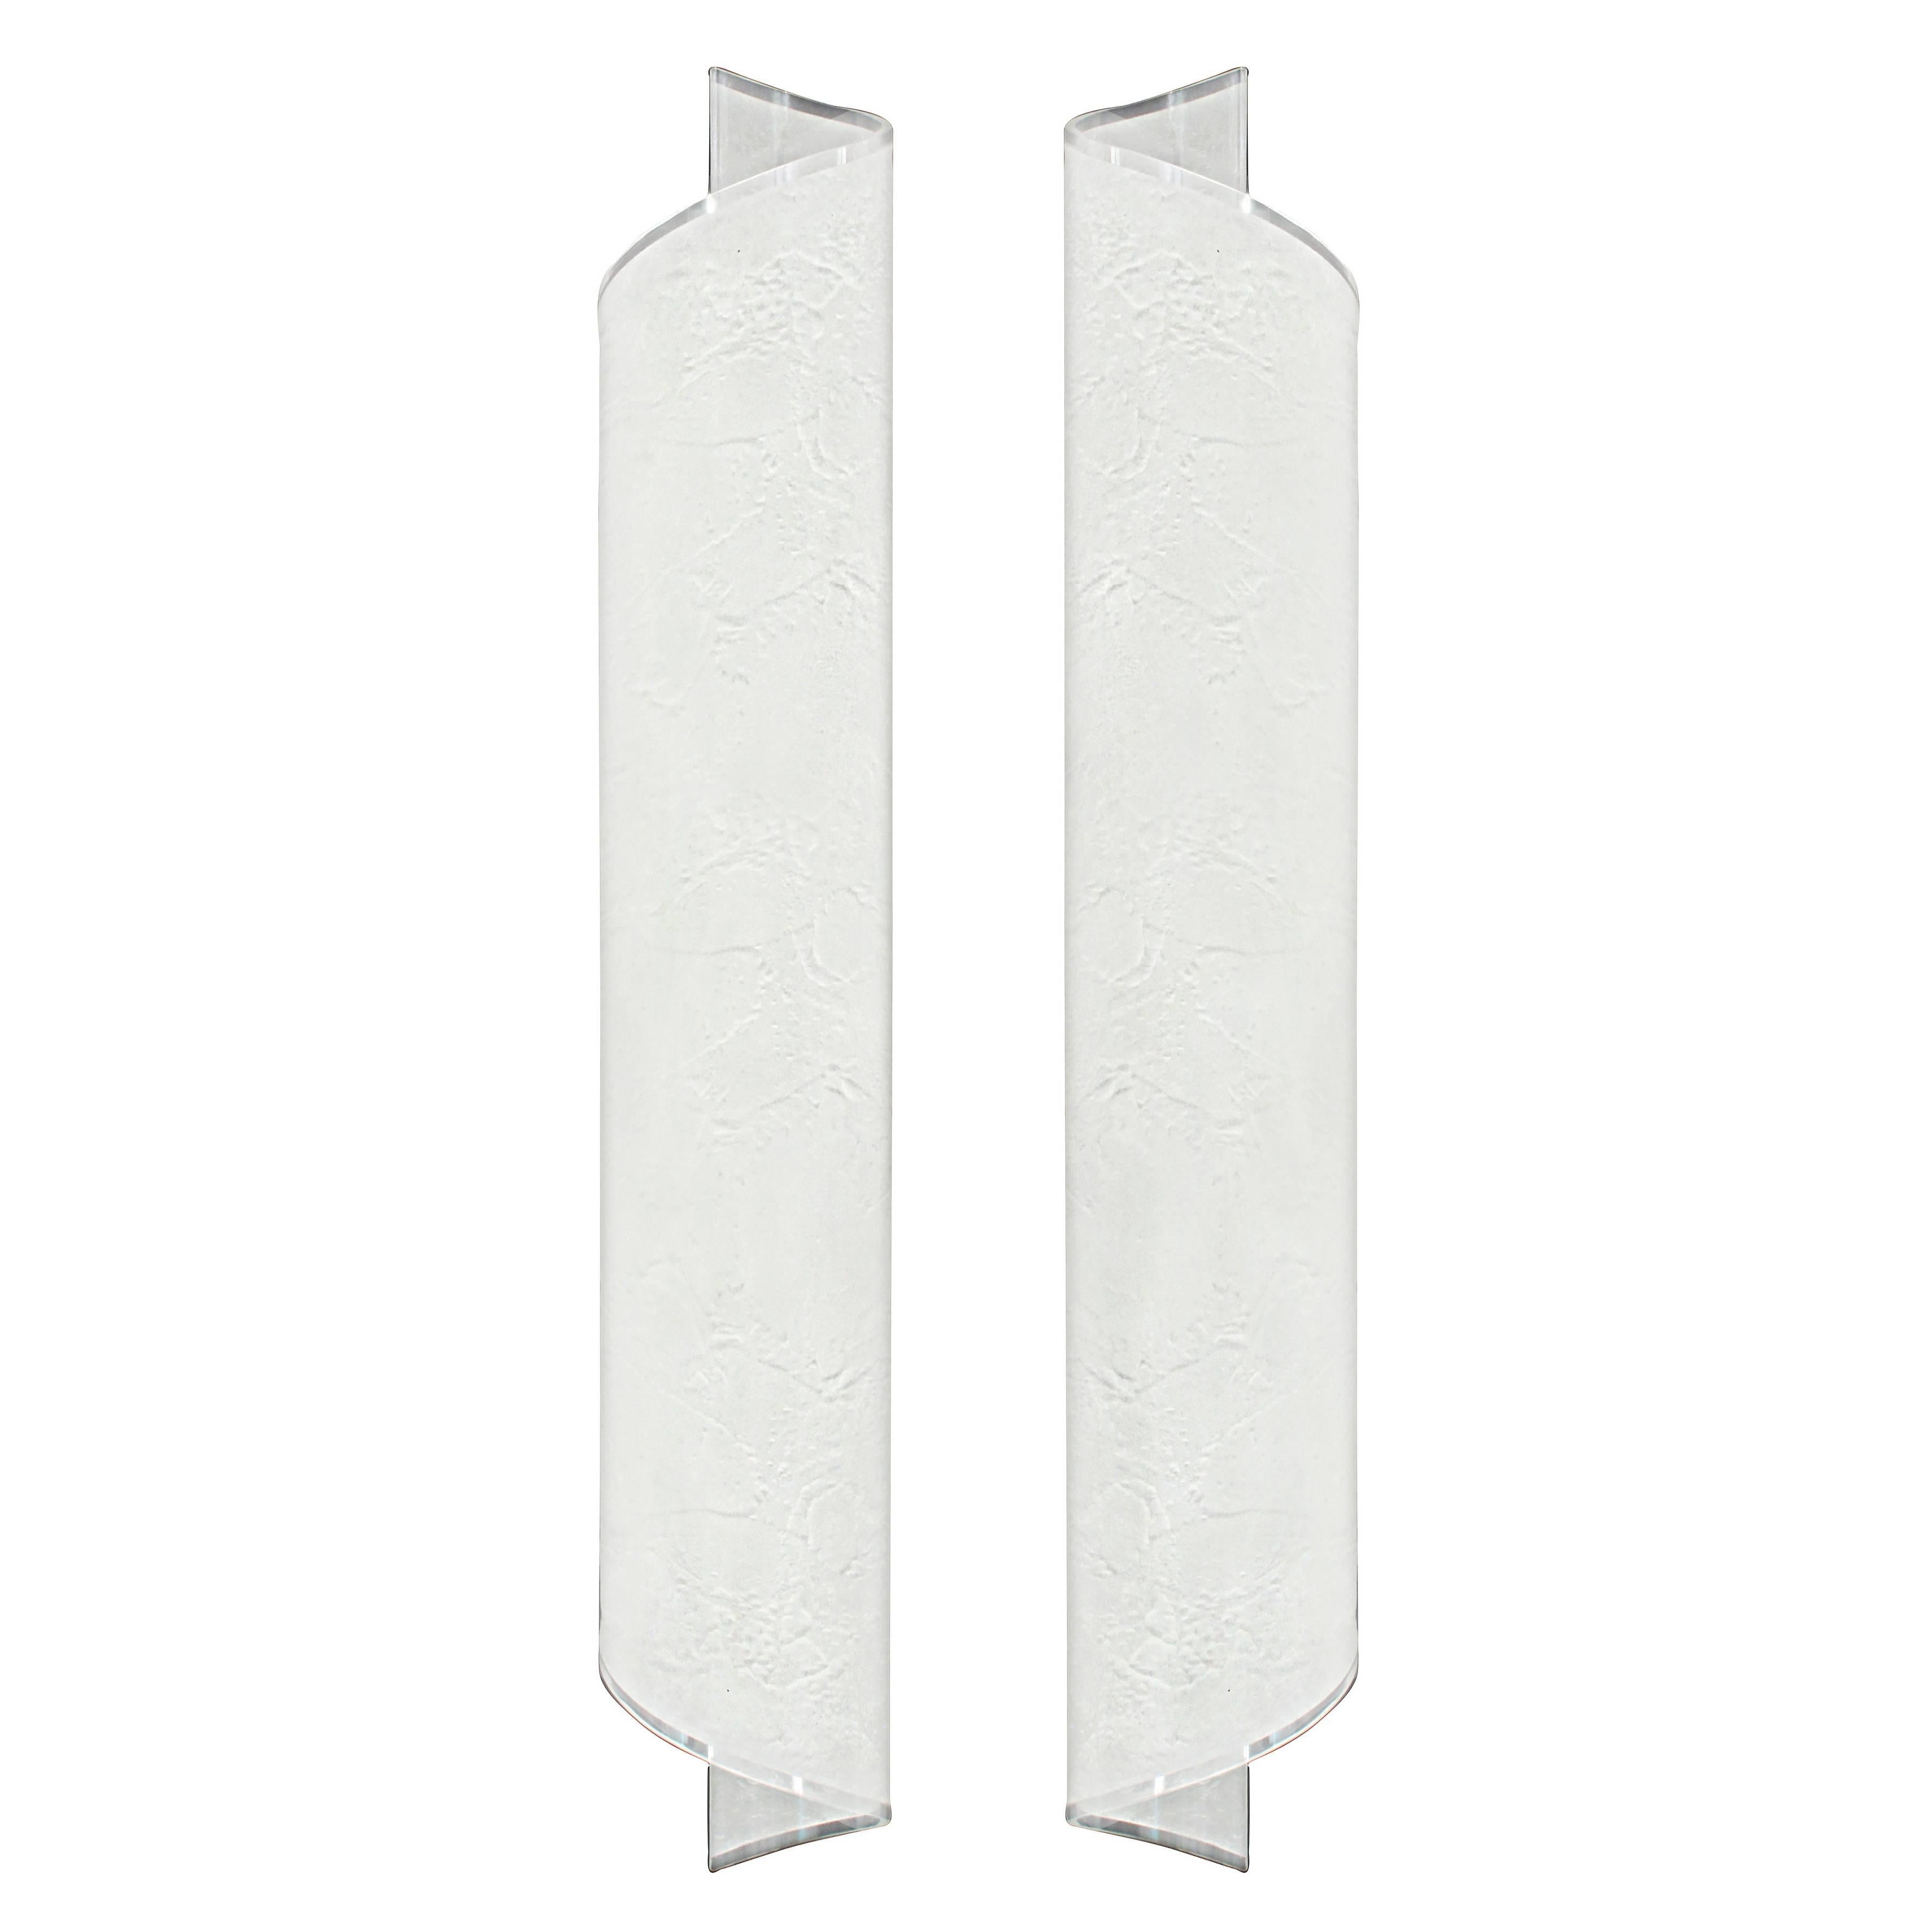 Pair of Textured Sand-Blasted Glass Scroll Sconces by Karl Springer